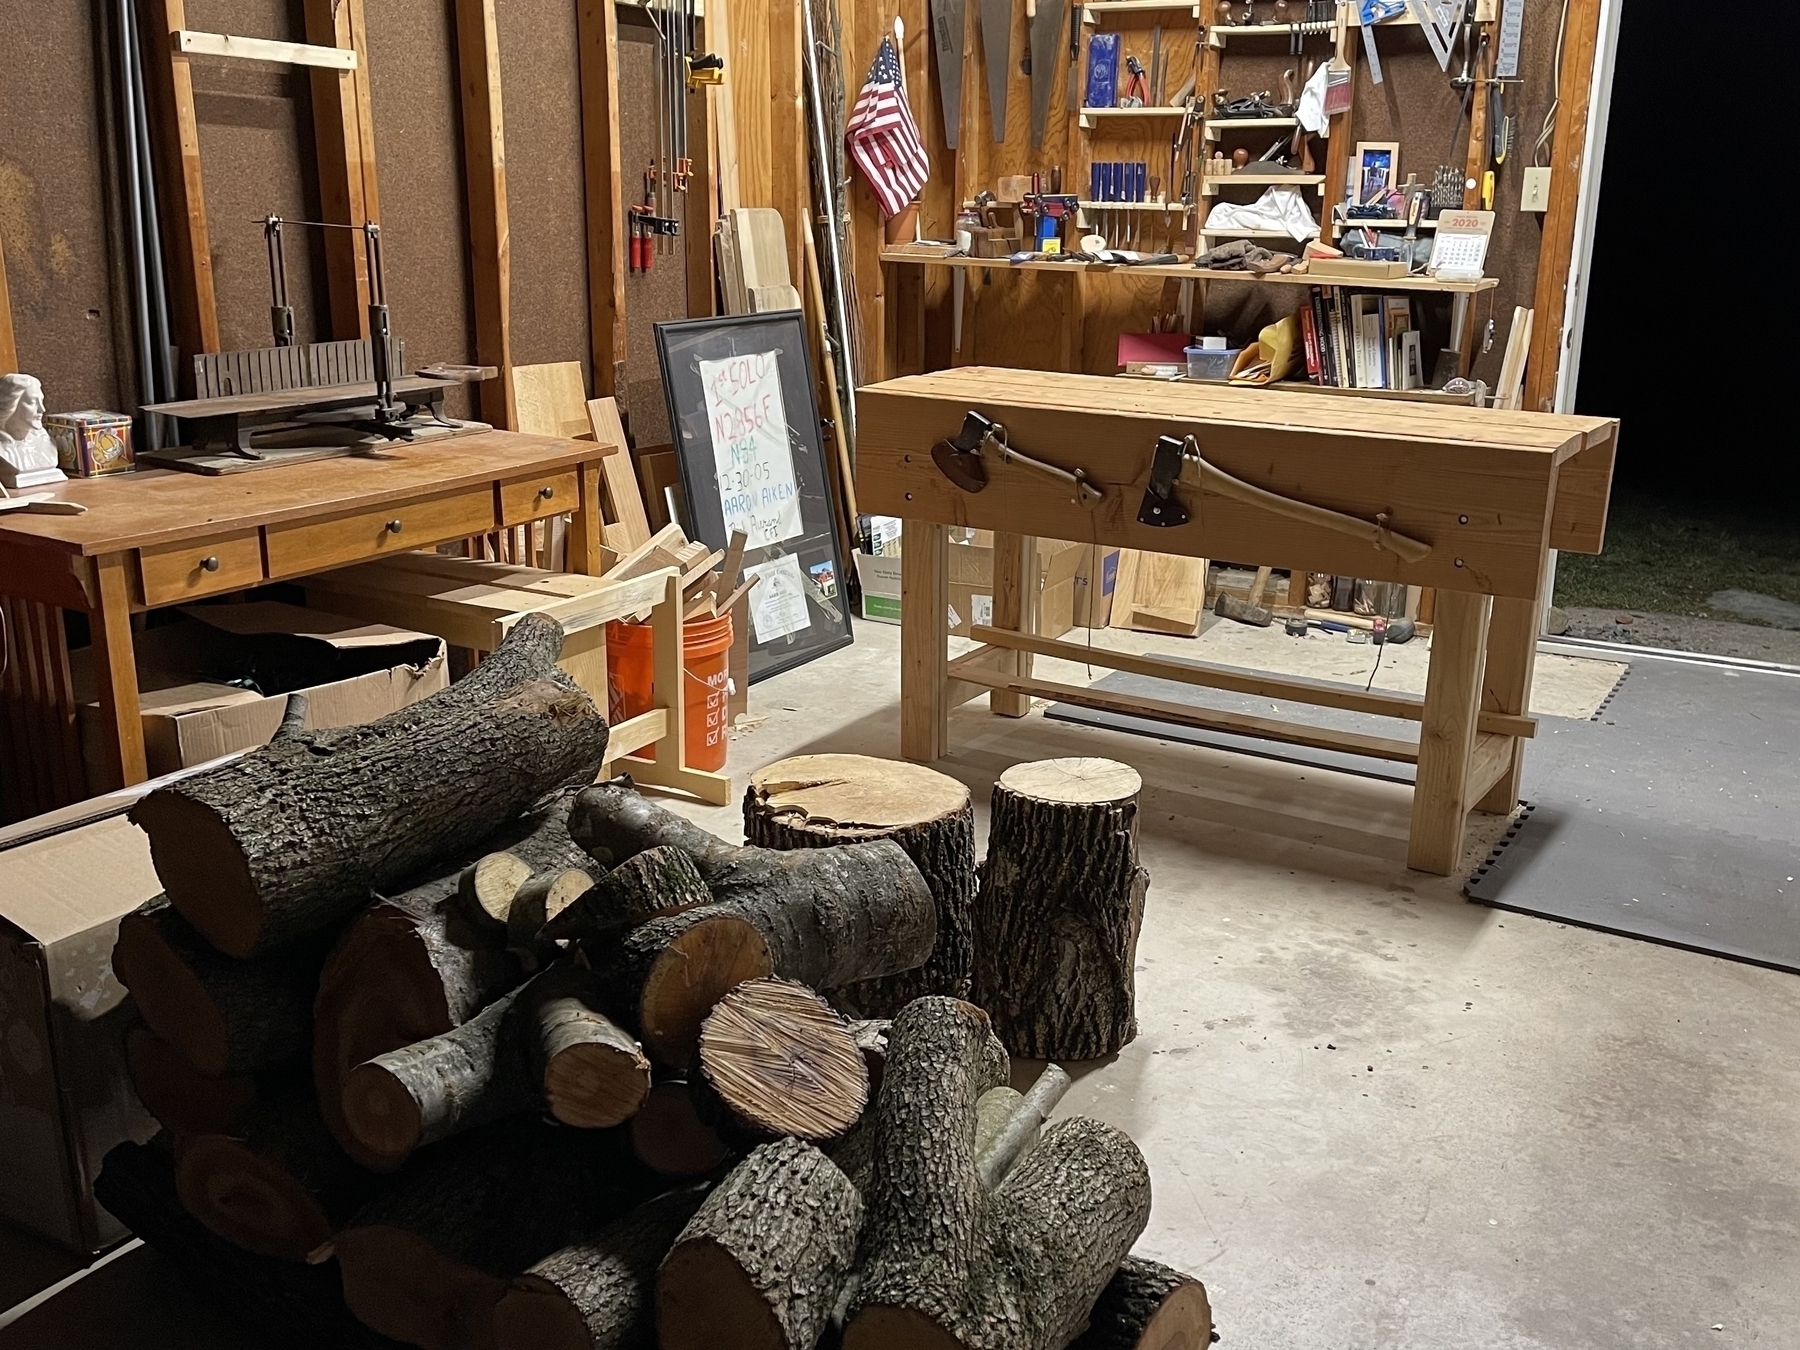 My previous workshop in December of 2020. My start in handcrafts. In what was then my garage. In view is a pile of cherry wood for use on future projects I had planned, my workbench, and my hand tools hanging on the far wall. 